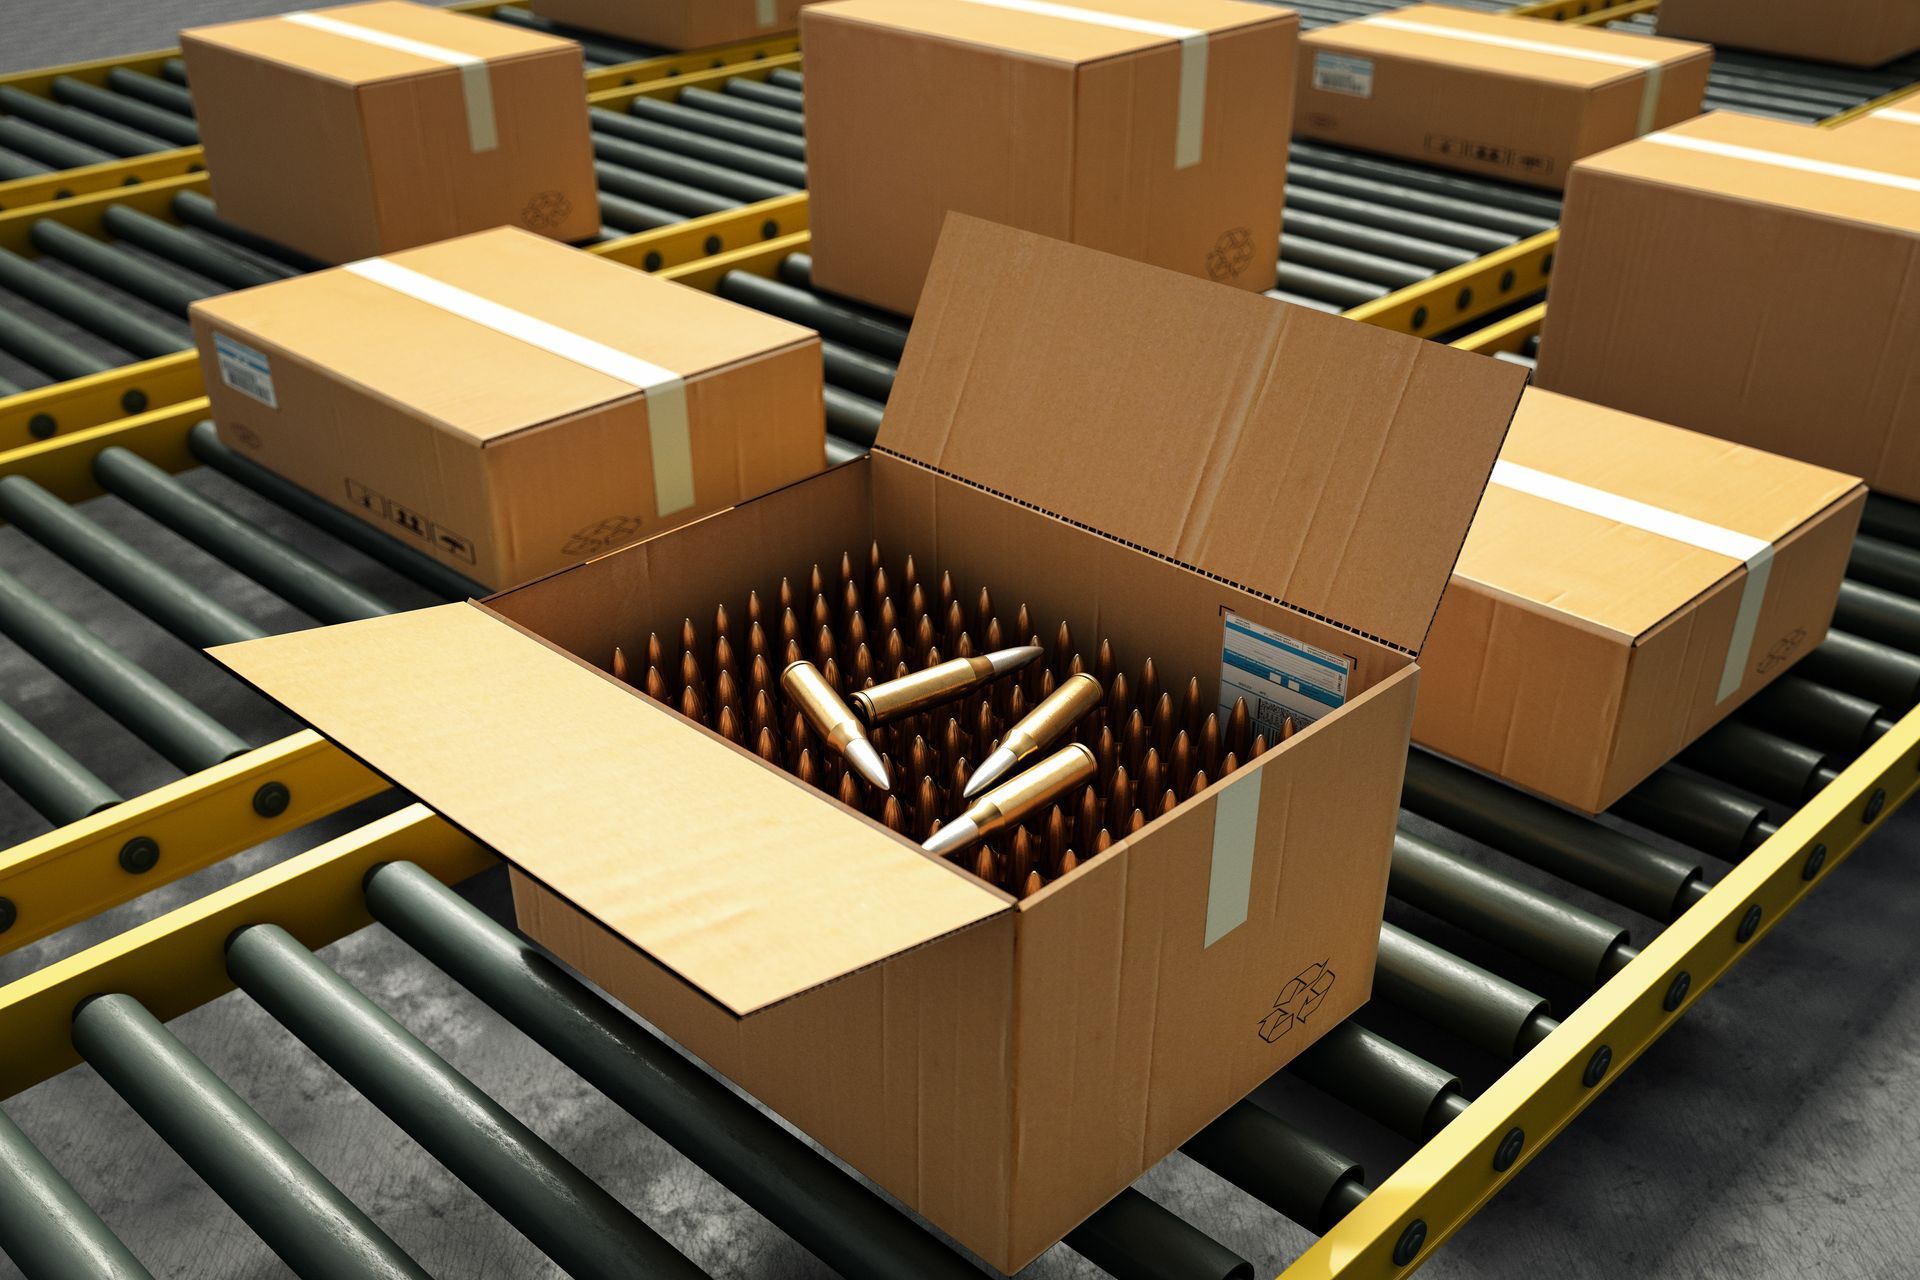 A cardboard box filled with bullets on a conveyor belt